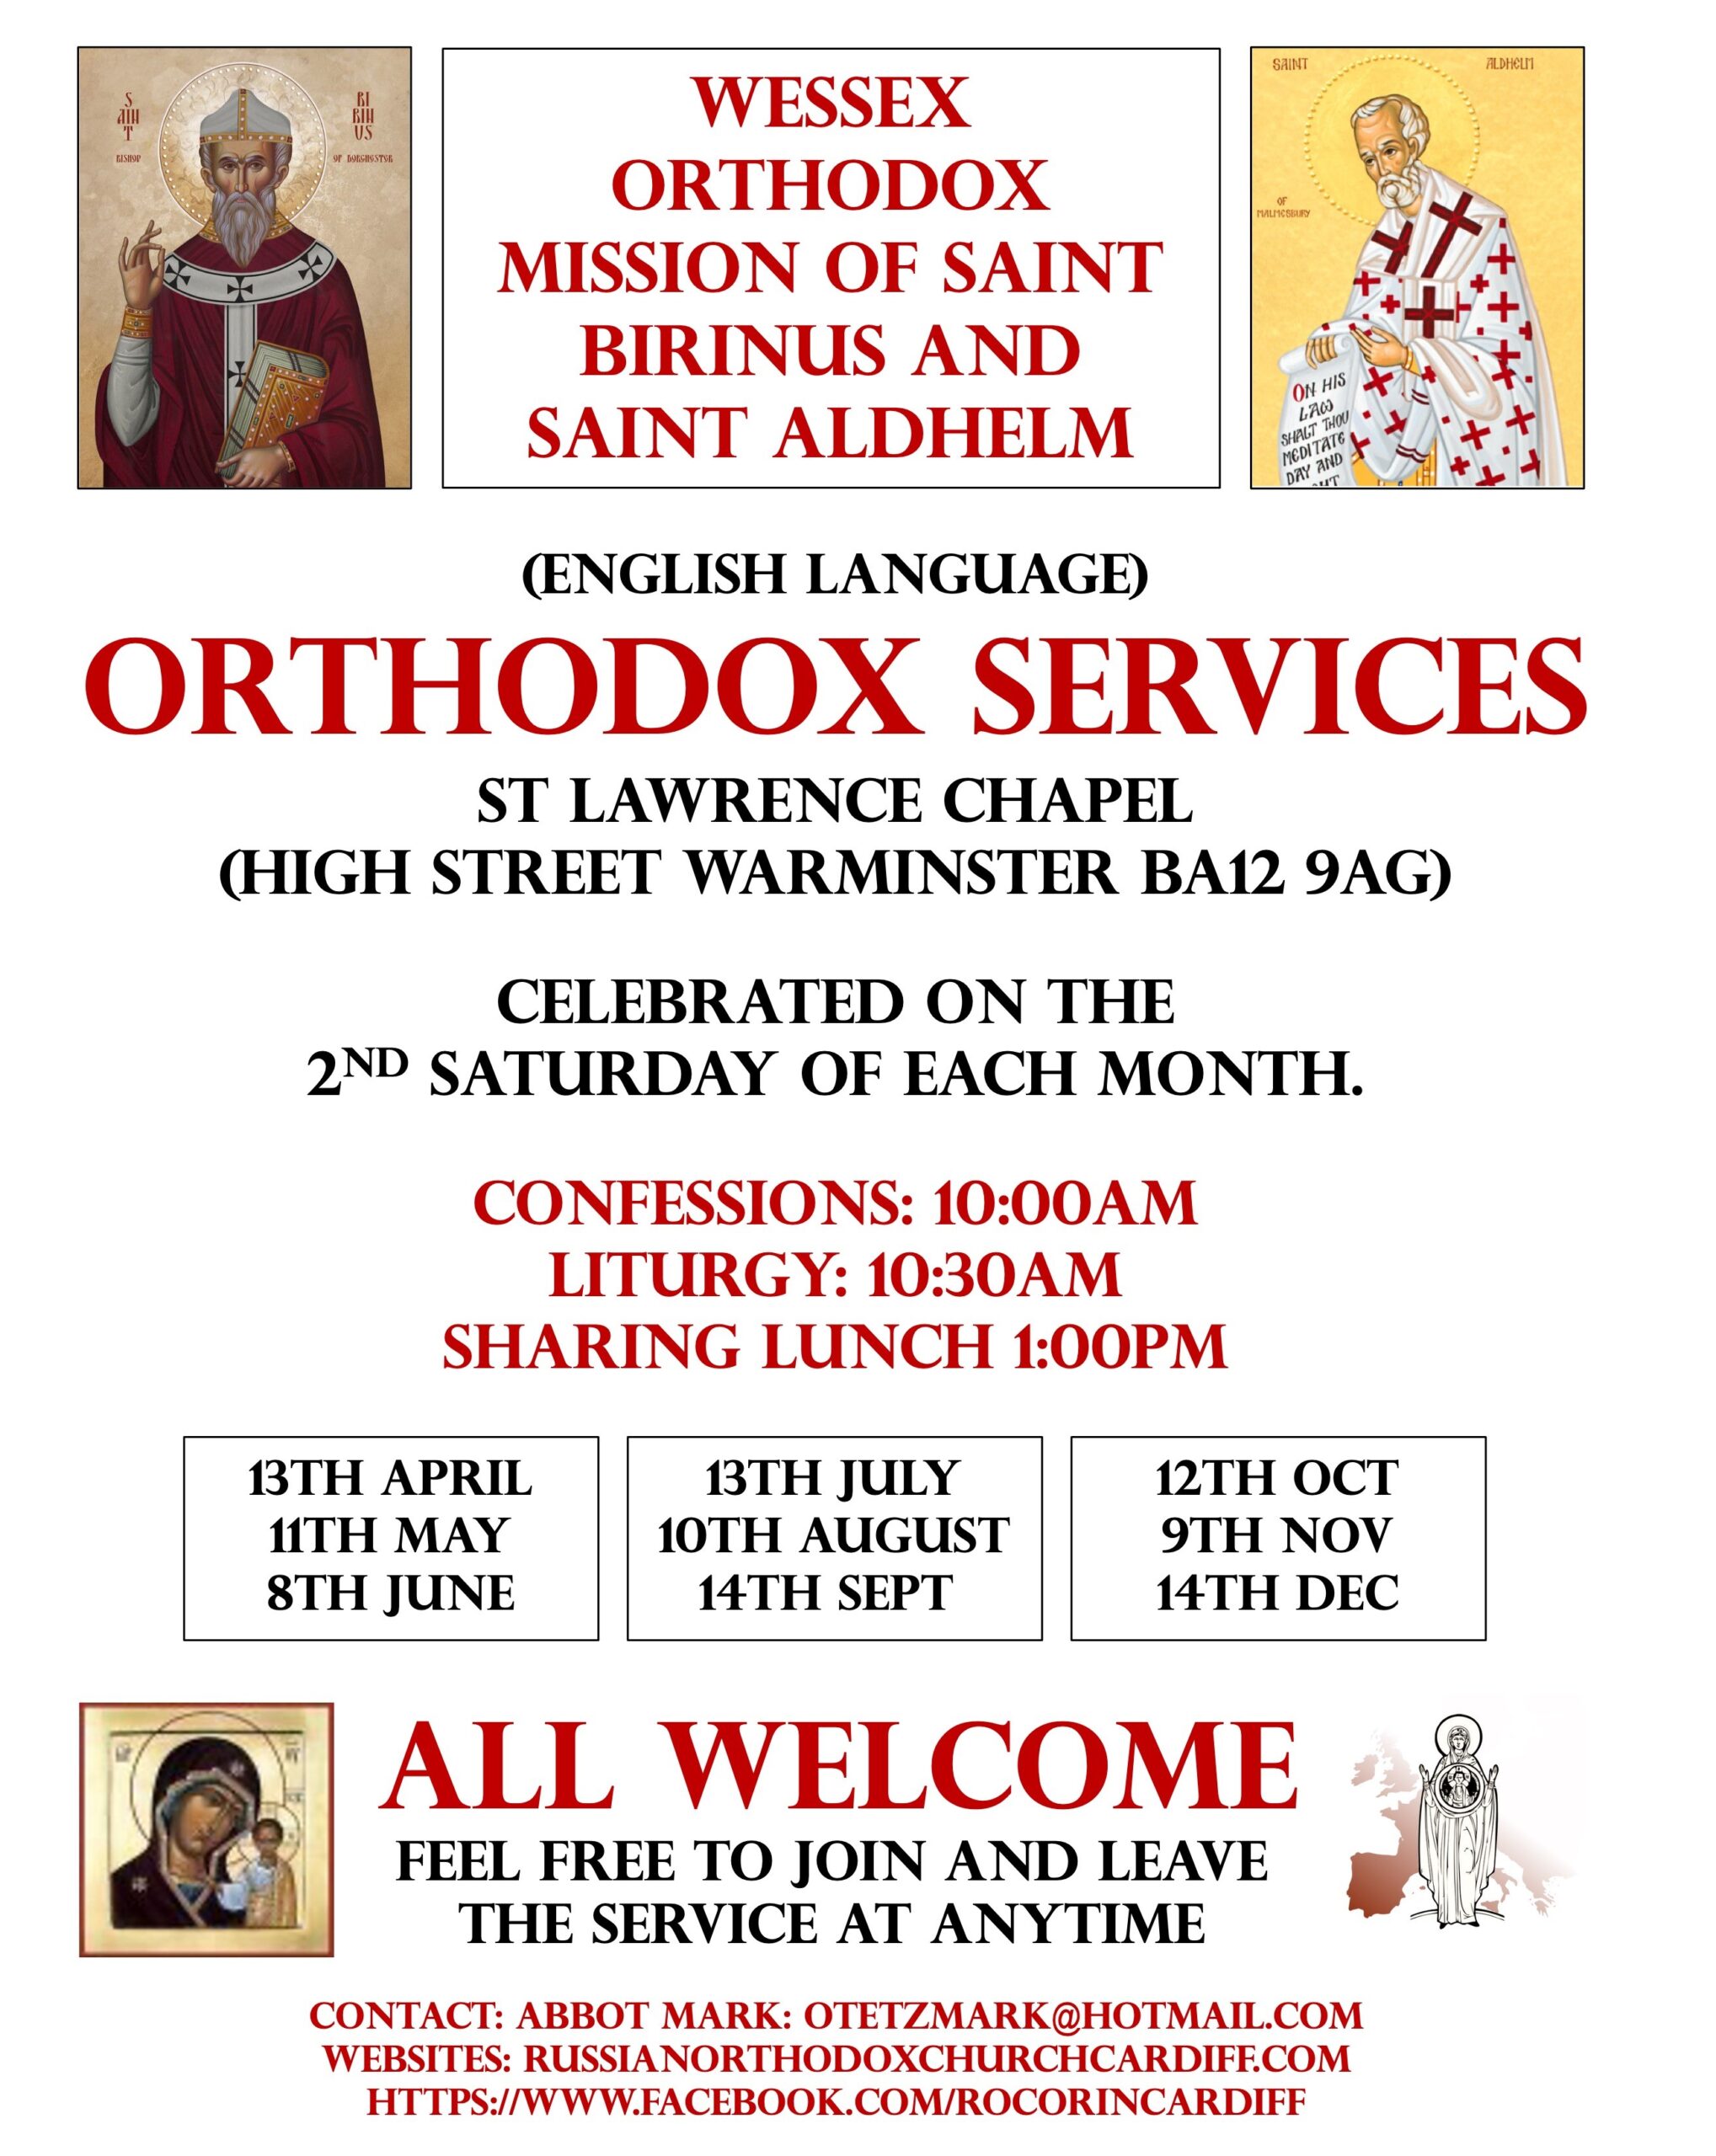 Church Services for the local Ukrainian and wider Orthodox community